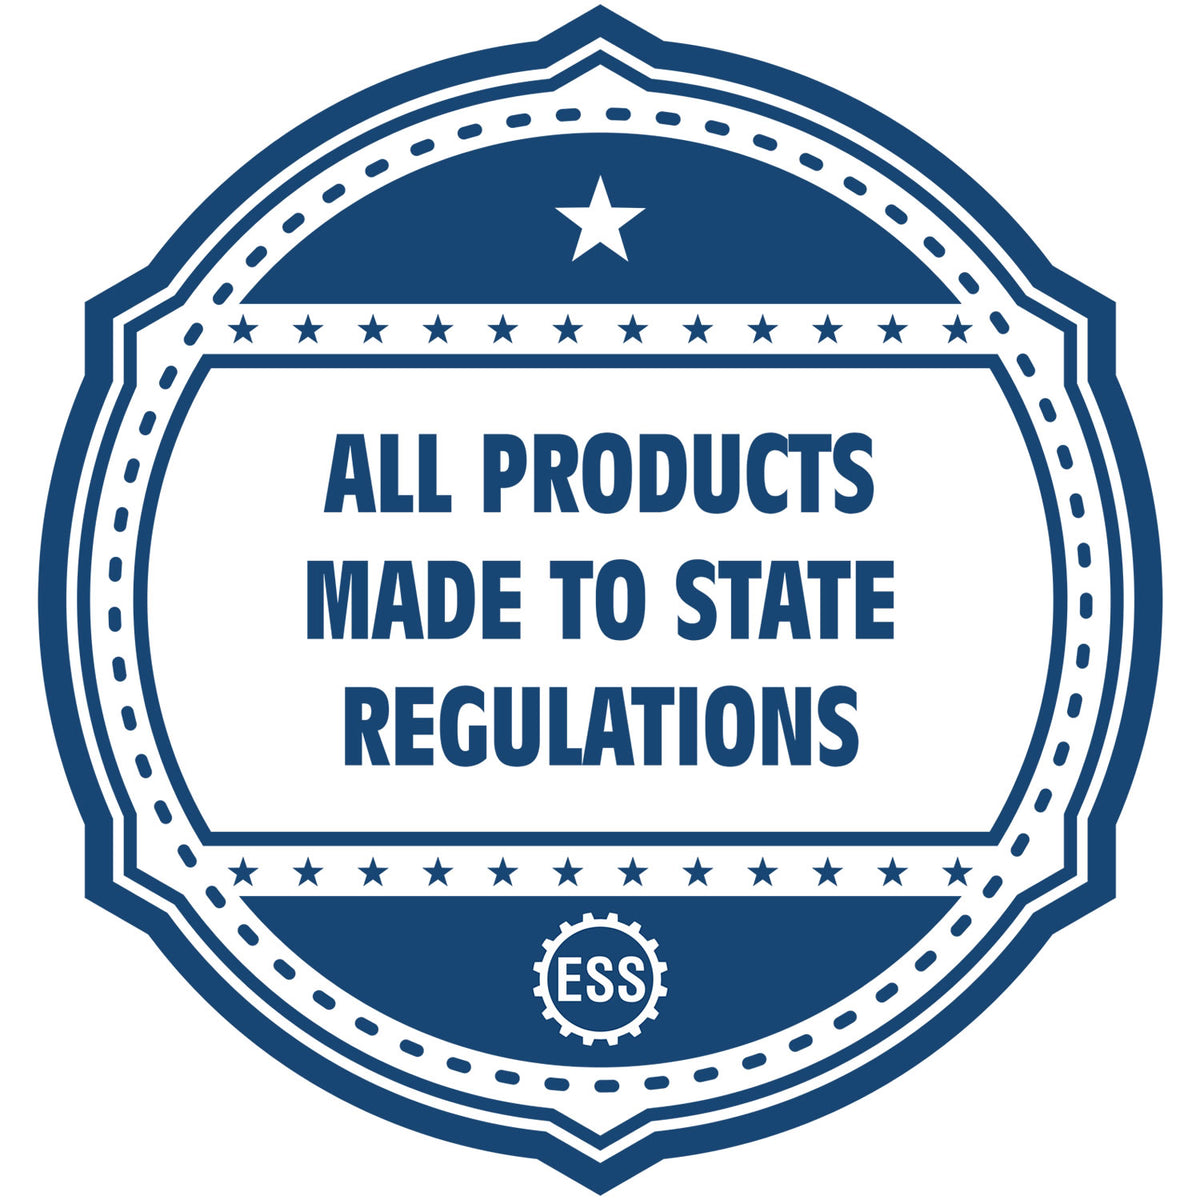 An icon or badge element for the Handheld Delaware Architect Seal Embosser showing that this product is made in compliance with state regulations.